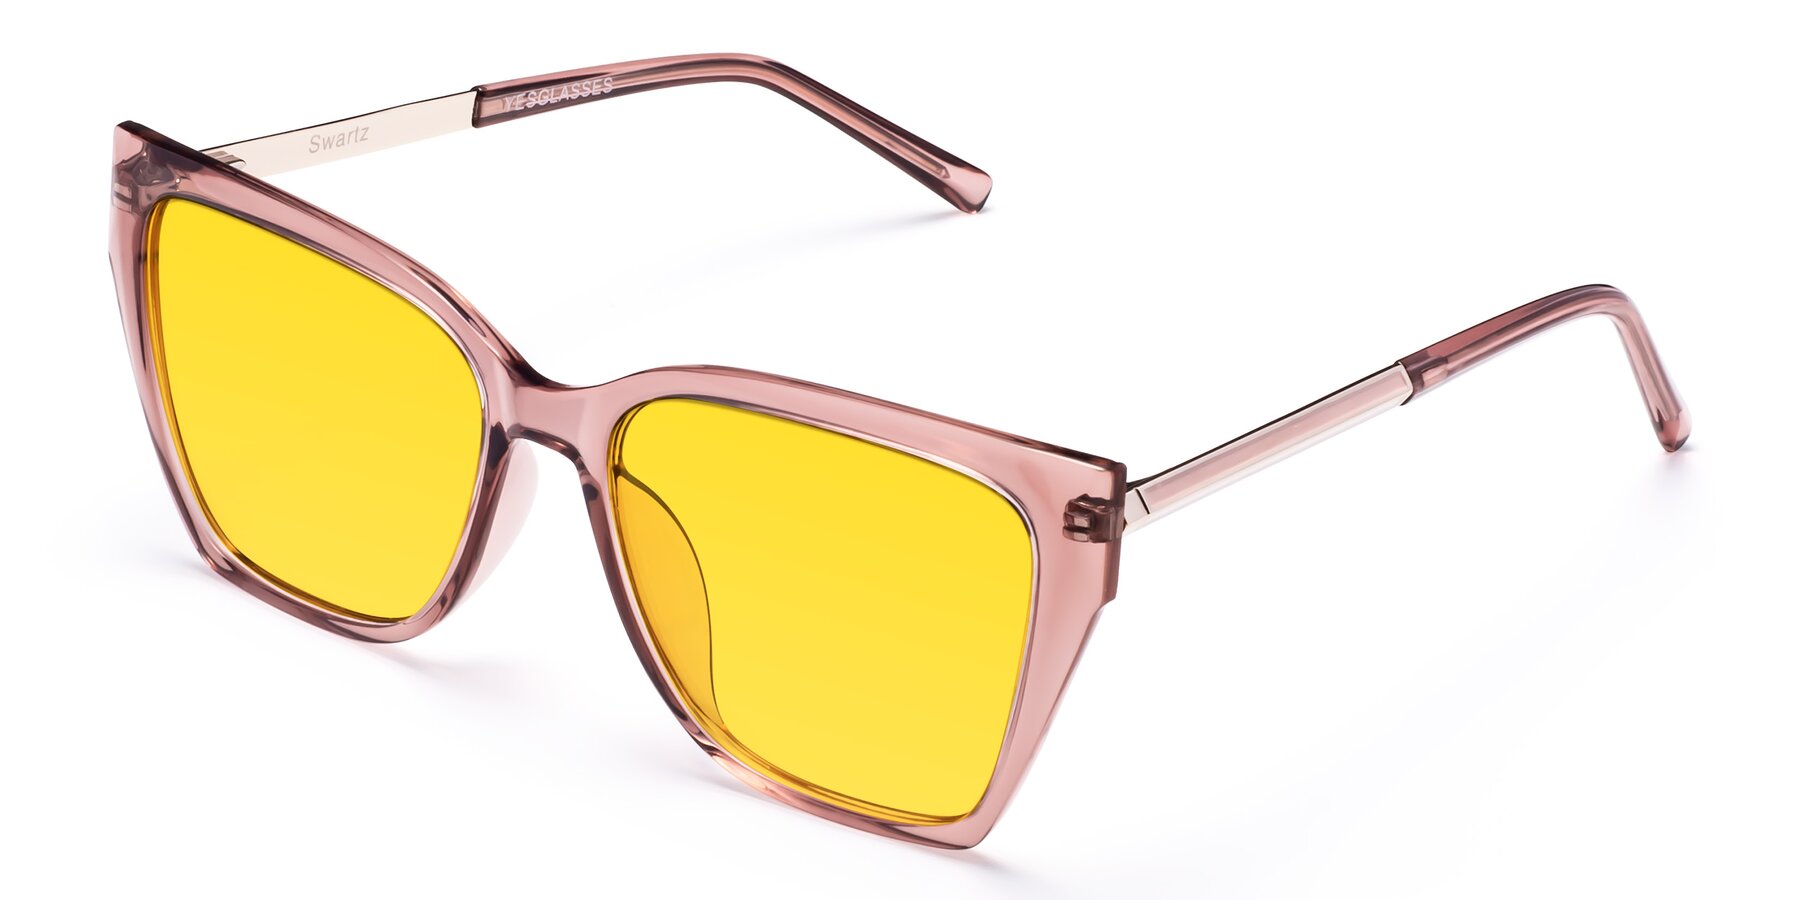 Angle of Swartz in Grape with Yellow Tinted Lenses